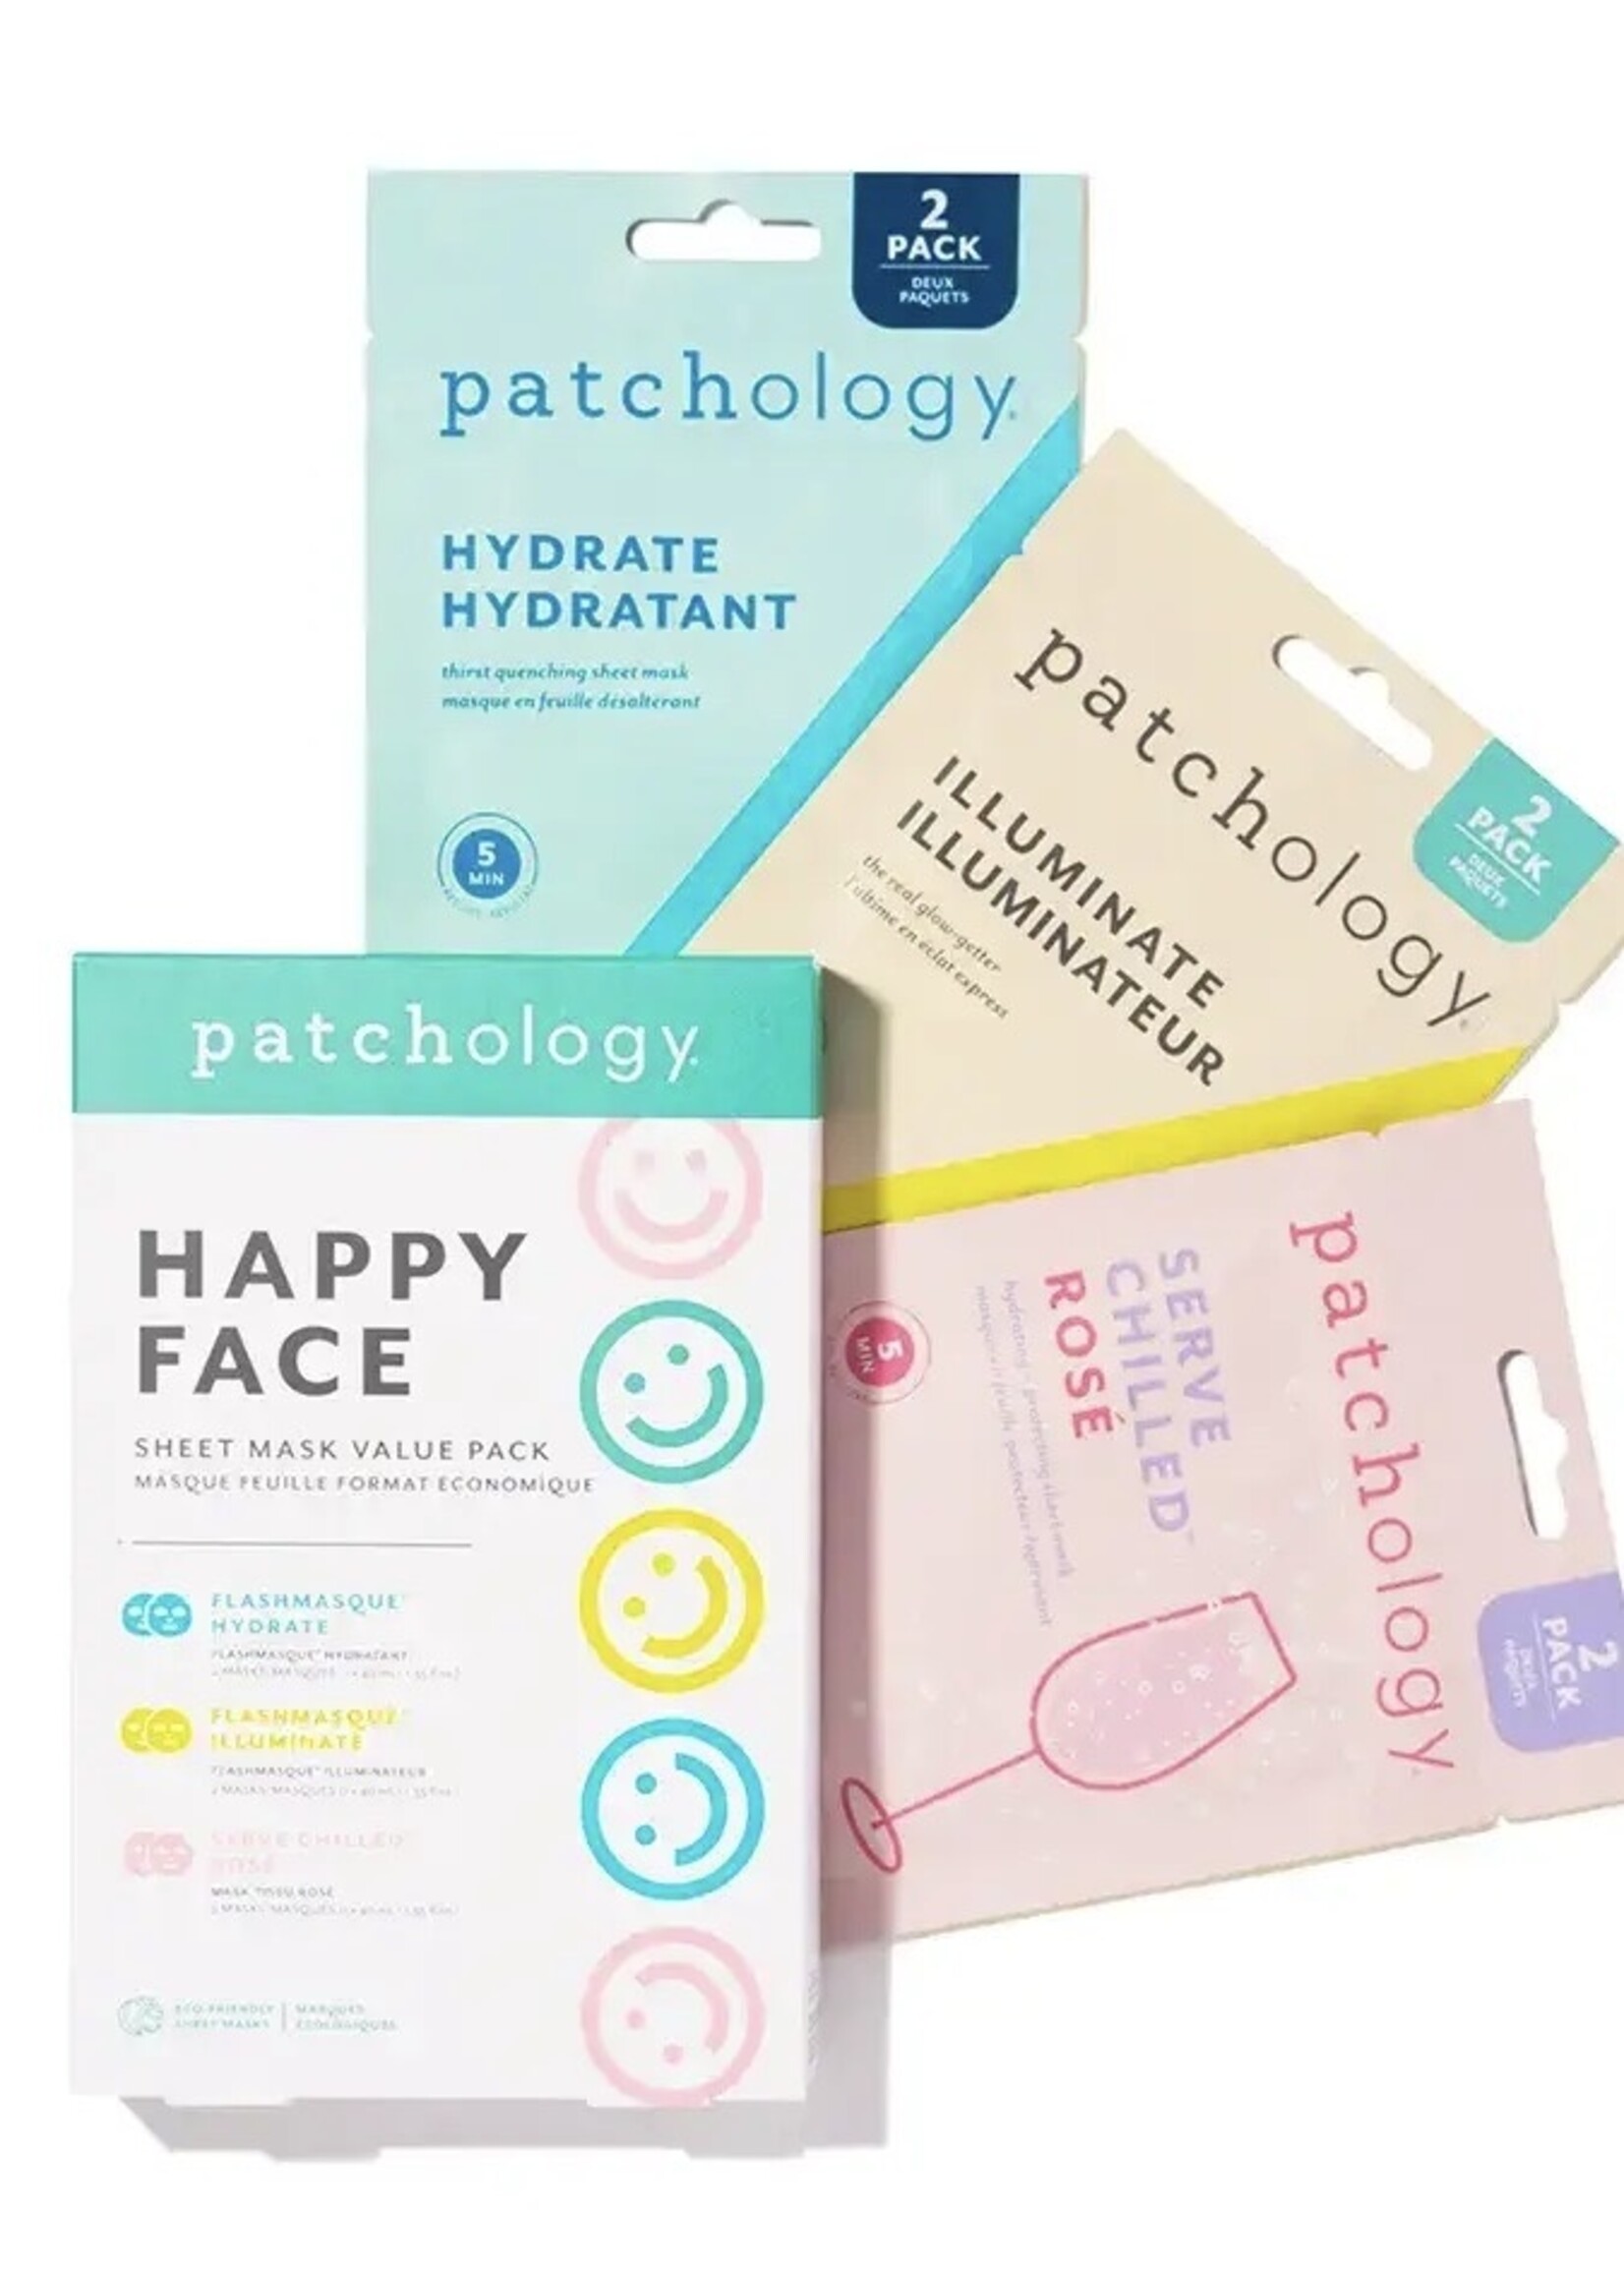 Patchology Sheet masks "Trio Happy face" by Patchology